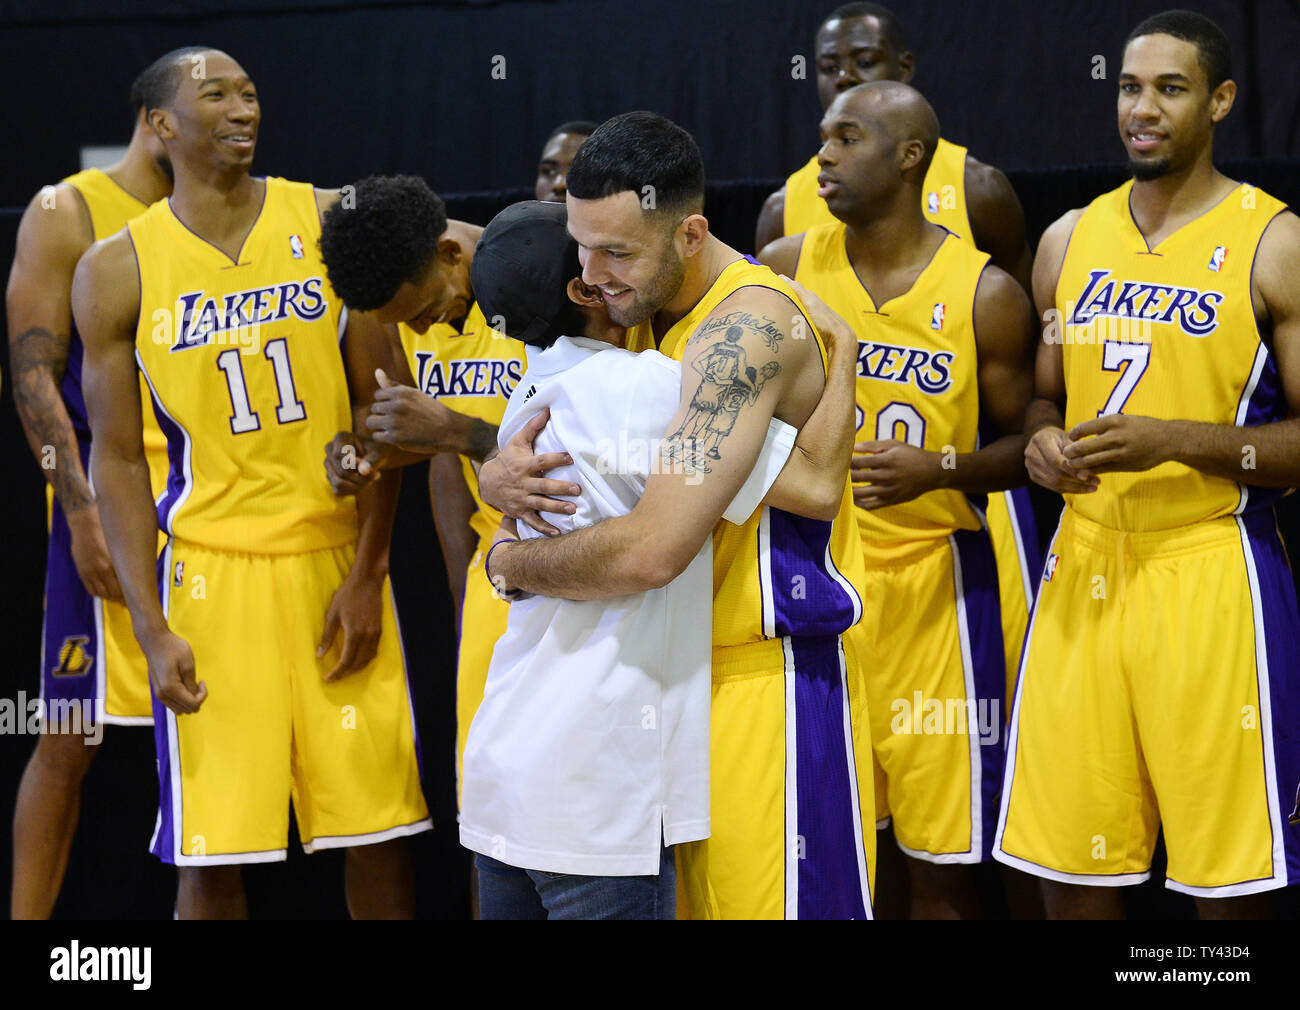 enseñar Temprano tifón Los Angeles Lakers' Jordan Farmar (1) embraces the Lakers' videographer as  the team gathers to participate in the basketball team's media day at the  Lakers training facility in El Segundo, California on